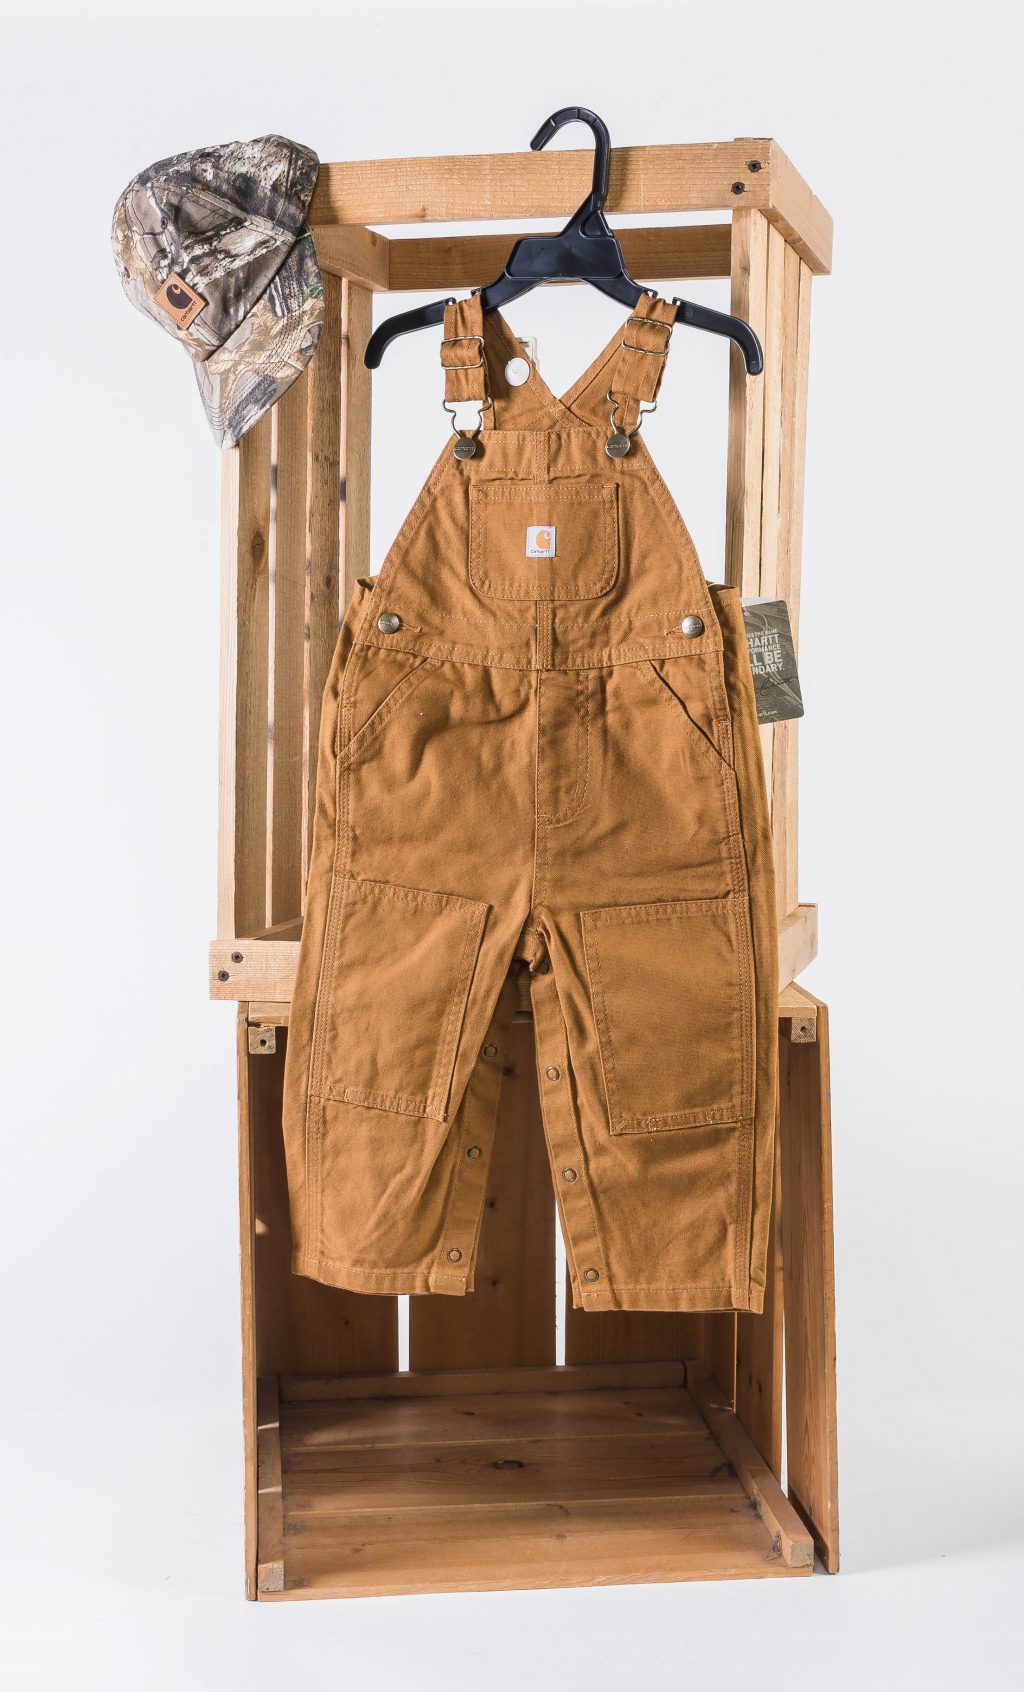 Carhartt Overalls and Camo Hat